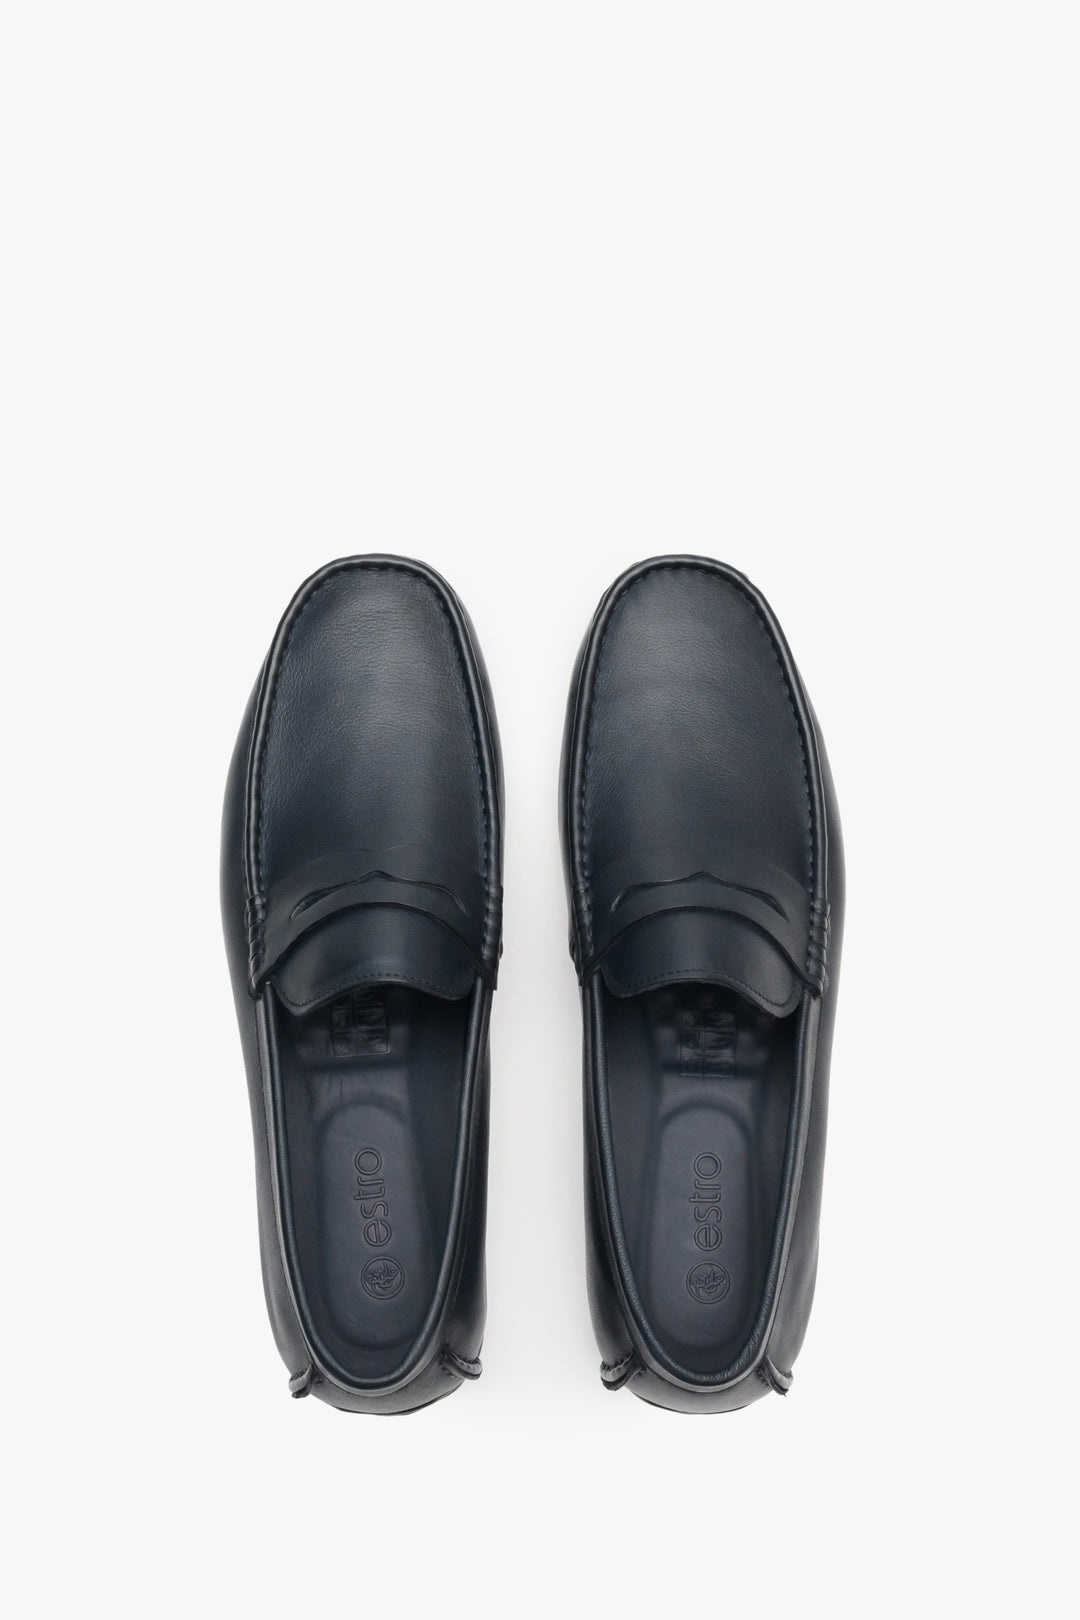 Men's navy blue leather loafers - top view shoe presentation.